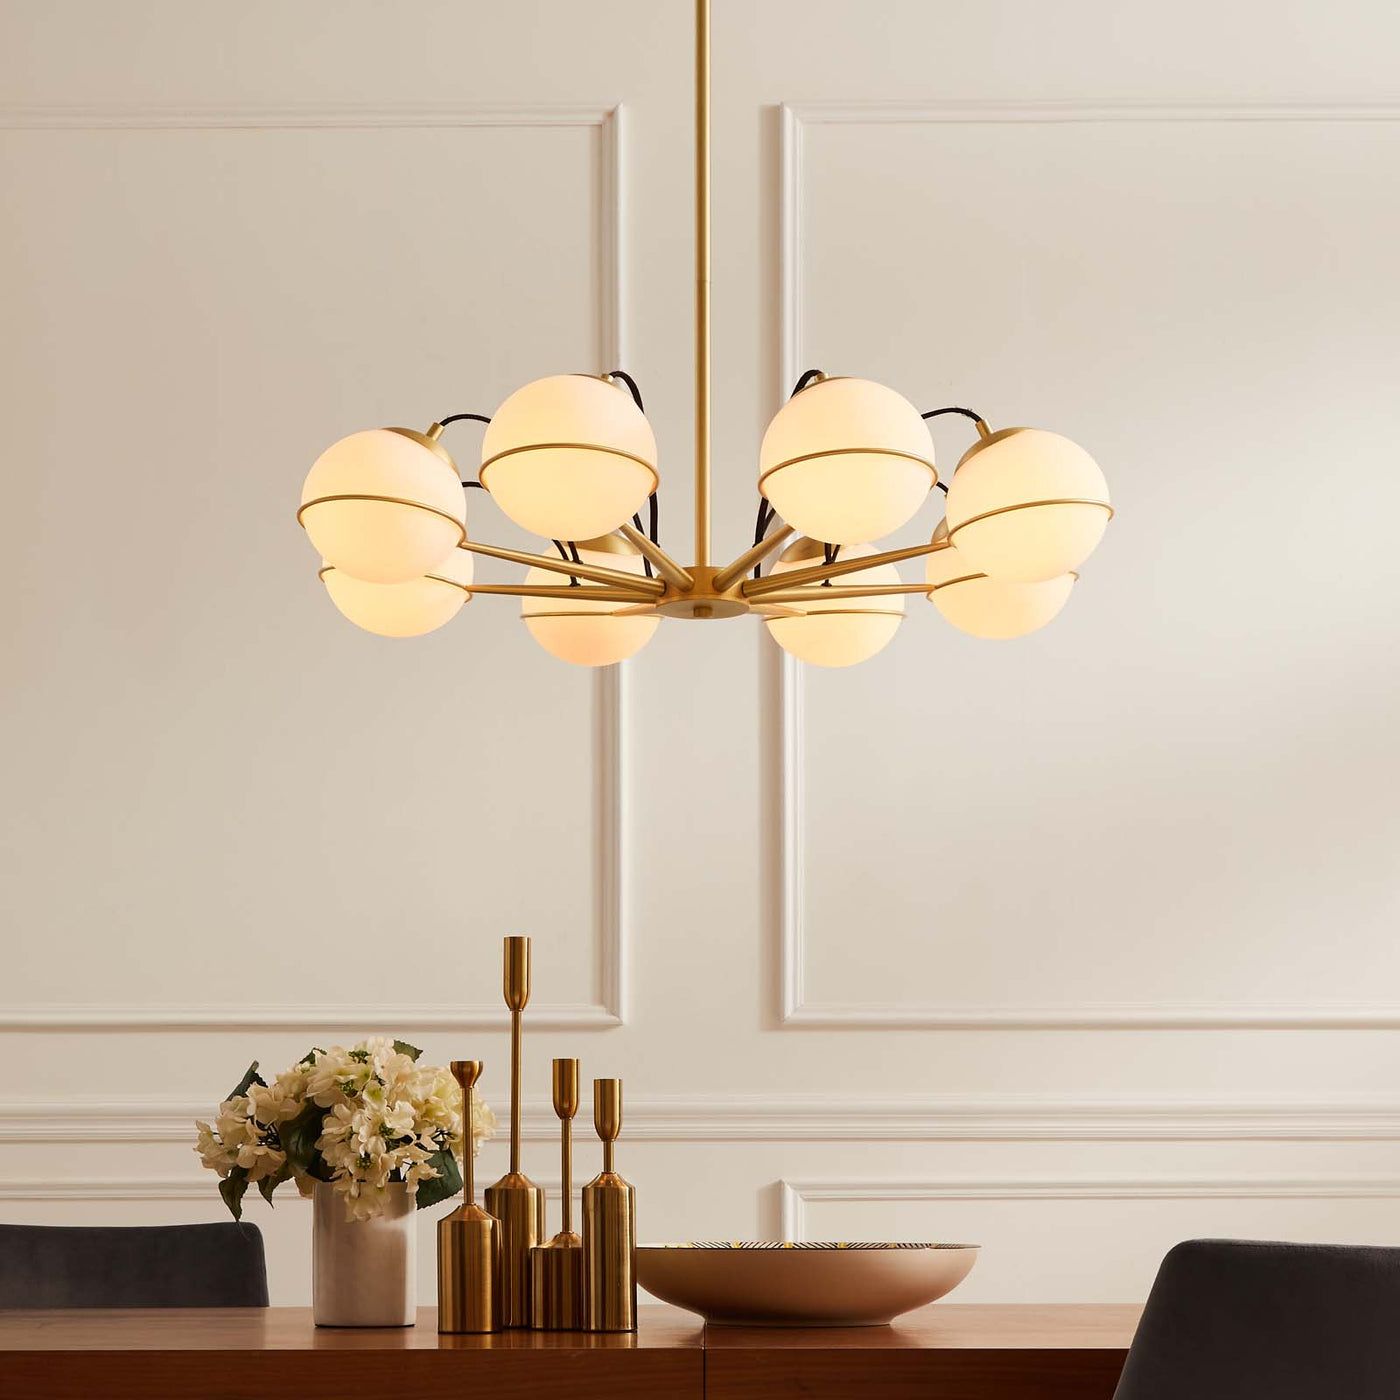 Affordable Chandeliers Stylish Lighting on a Budget: Best Value Chandeliers for Your Home